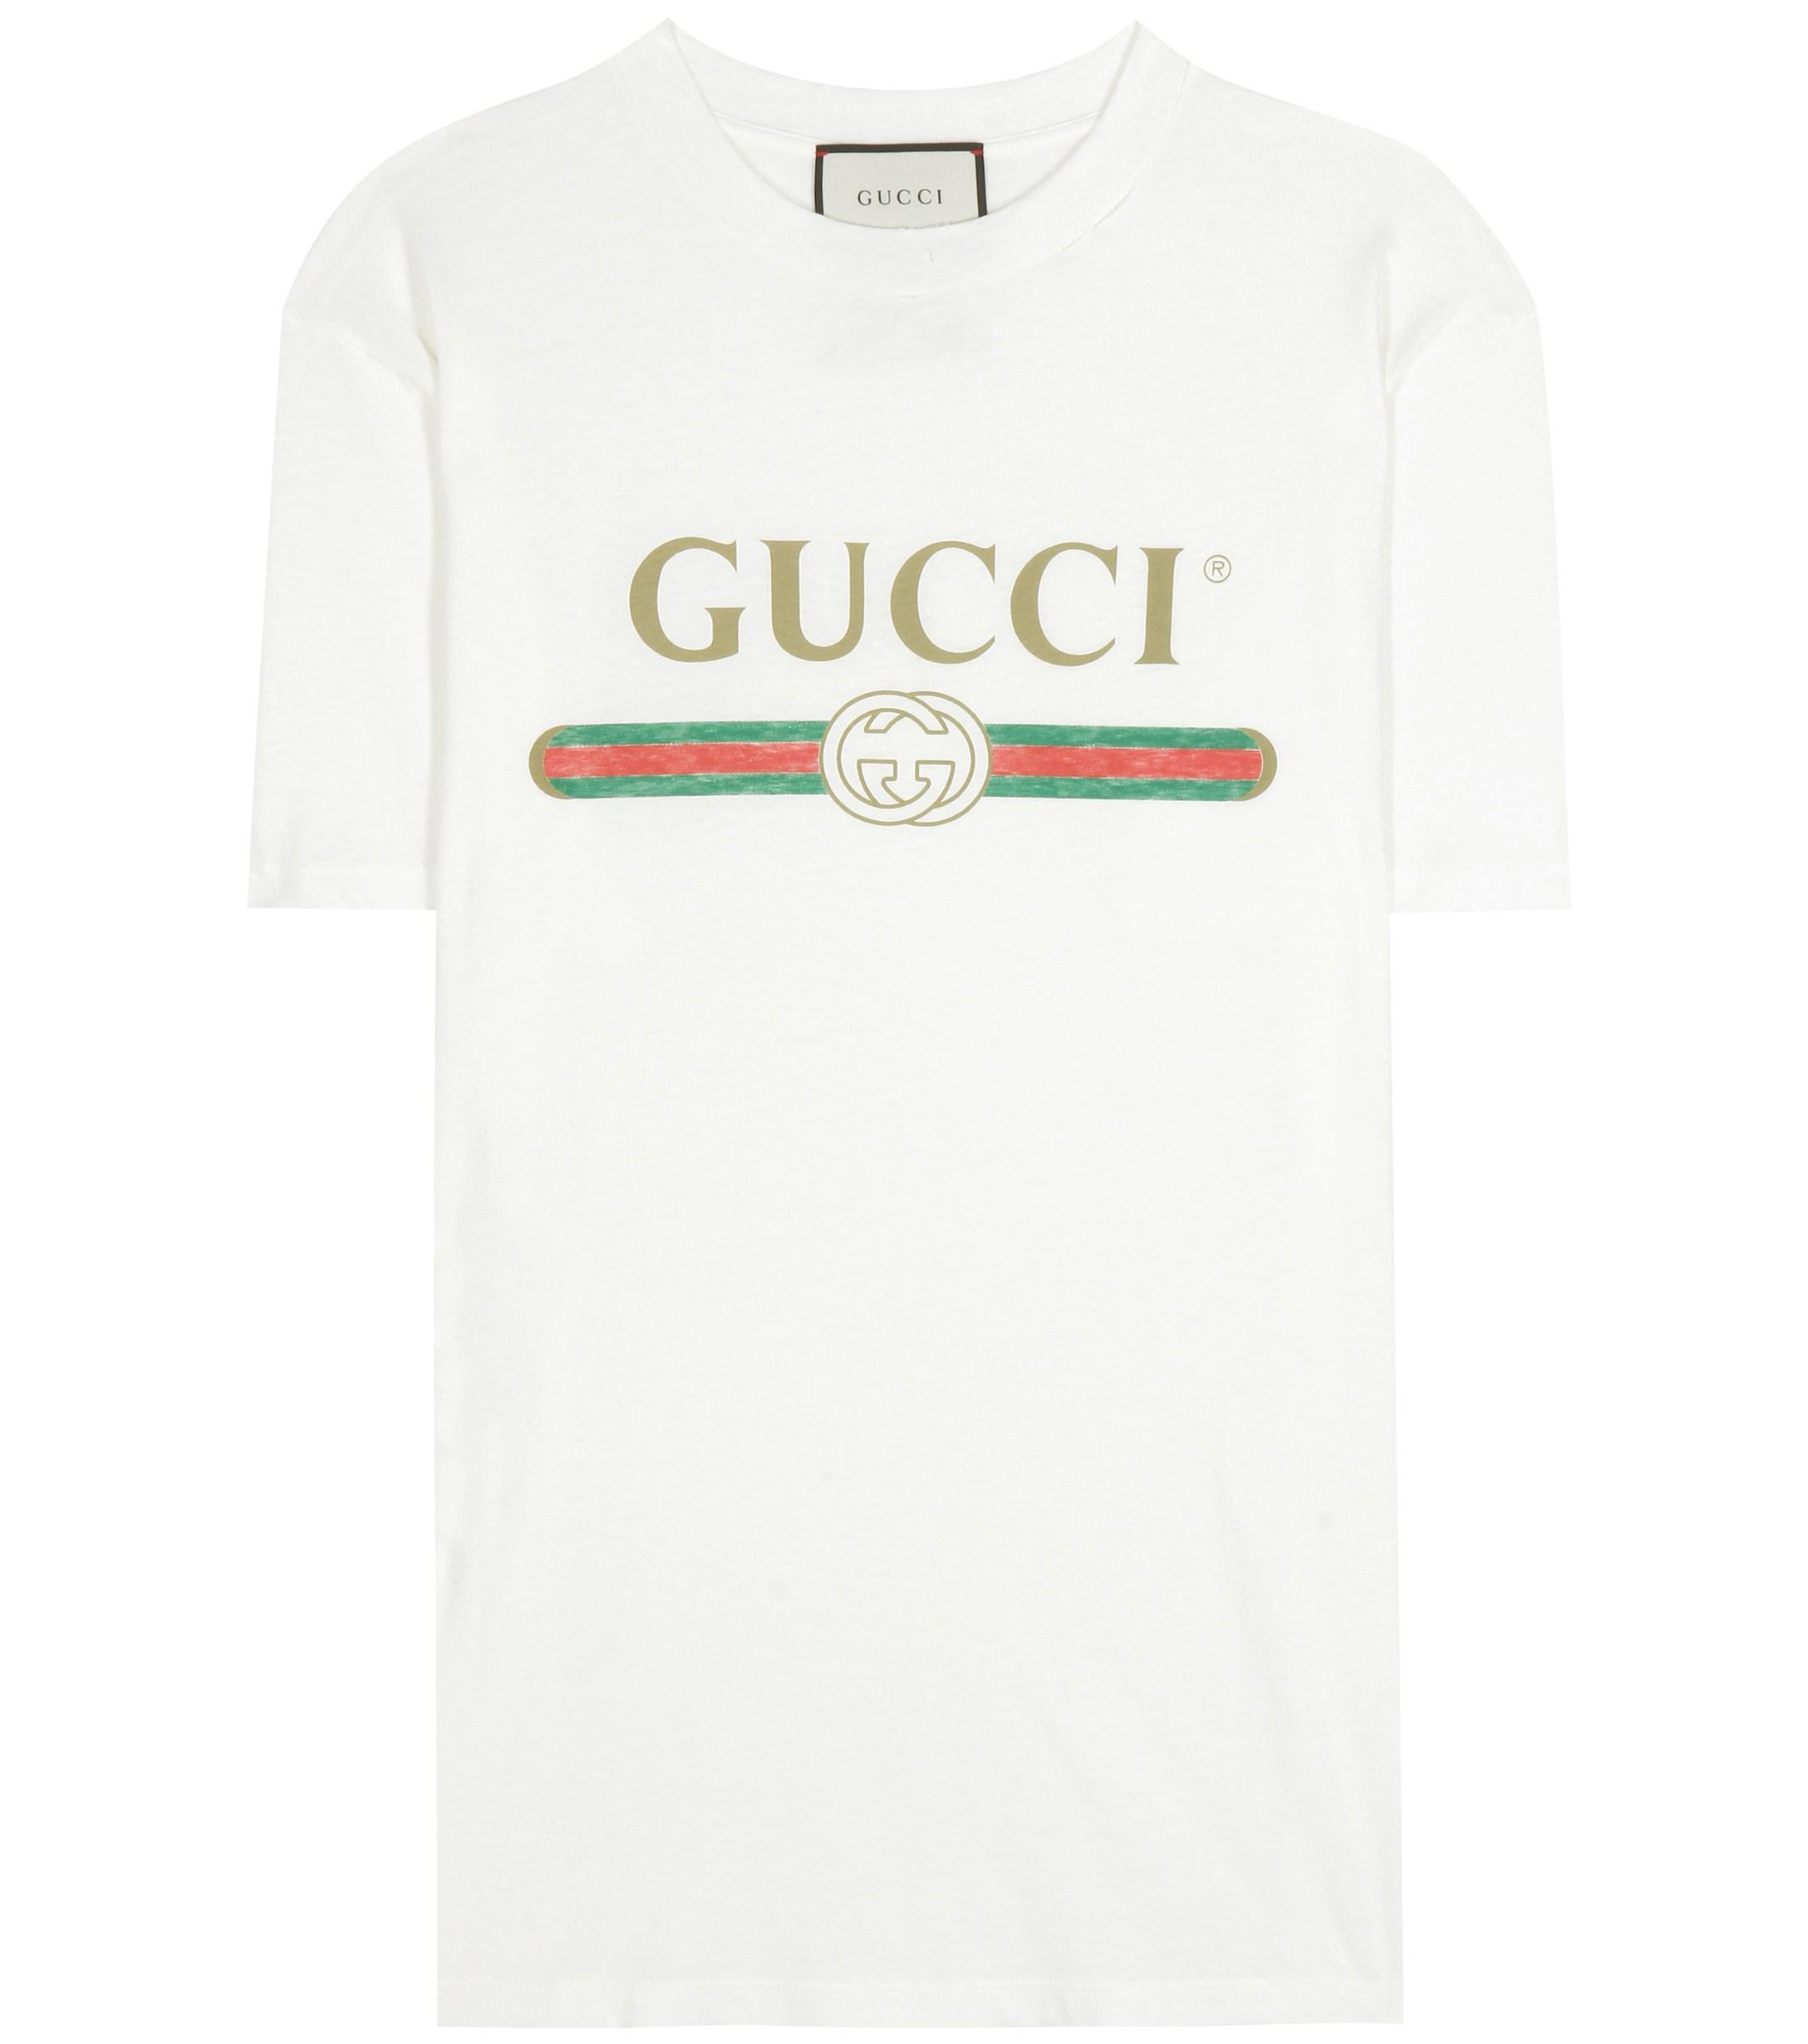 Gucci Printed Cotton T-shirt in White - Lyst